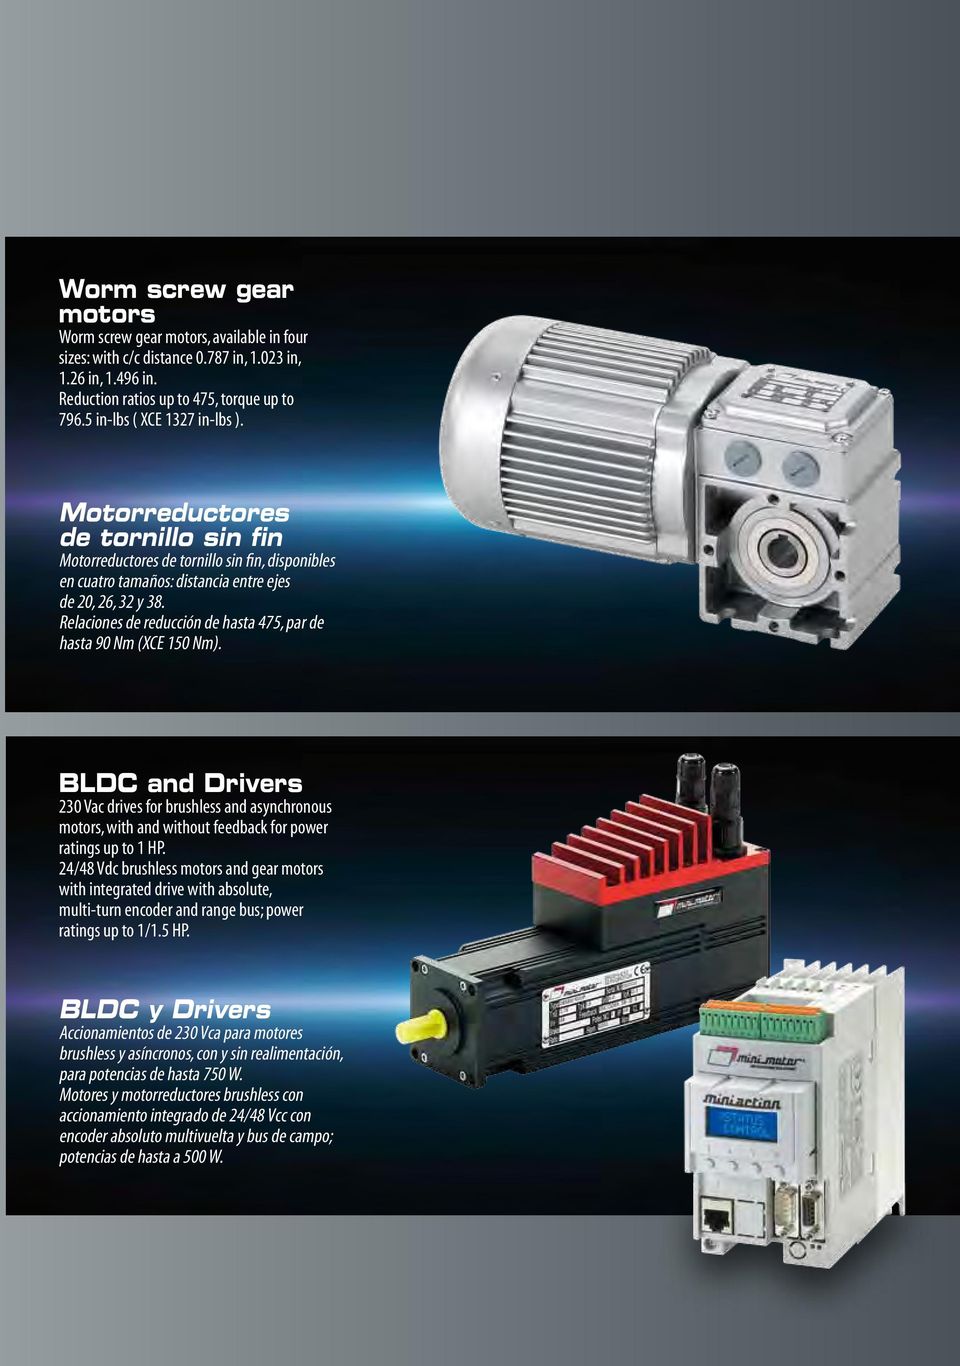 Relaciones de reducción de hasta 475, par de hasta 90 Nm (XCE 150 Nm). BLDC and Drivers 230 Vac drives for brushless and asynchronous motors, with and without feedback for power ratings up to 1 HP.